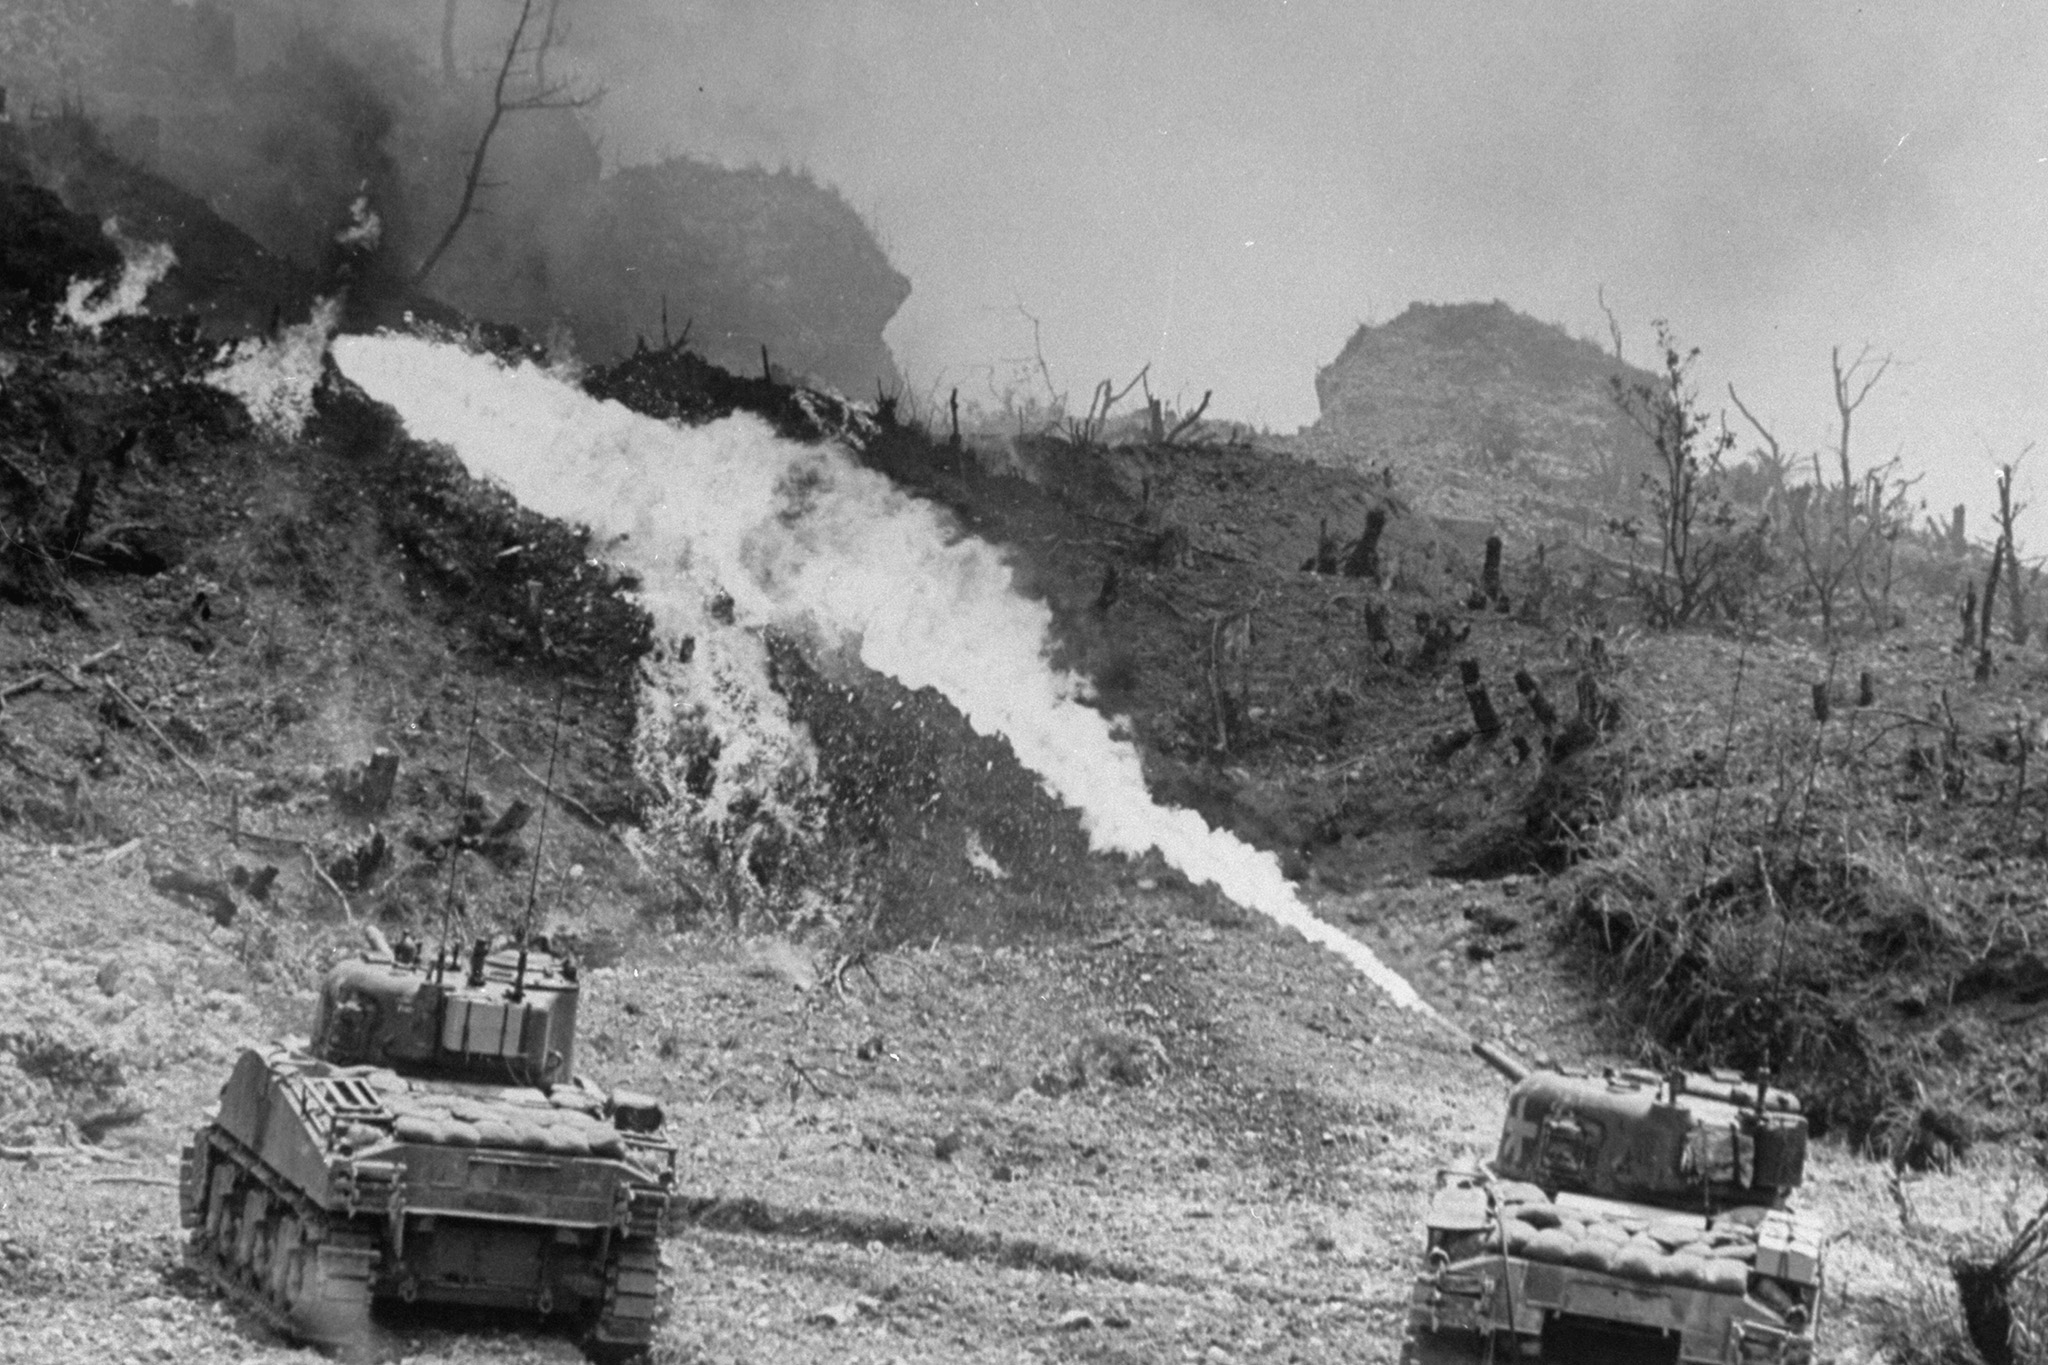 American tanks of the Army 7th Division using specially equipped flame throwers to burn Japanese defenders out of their caves and pillboxes, Okinawa, 1945.